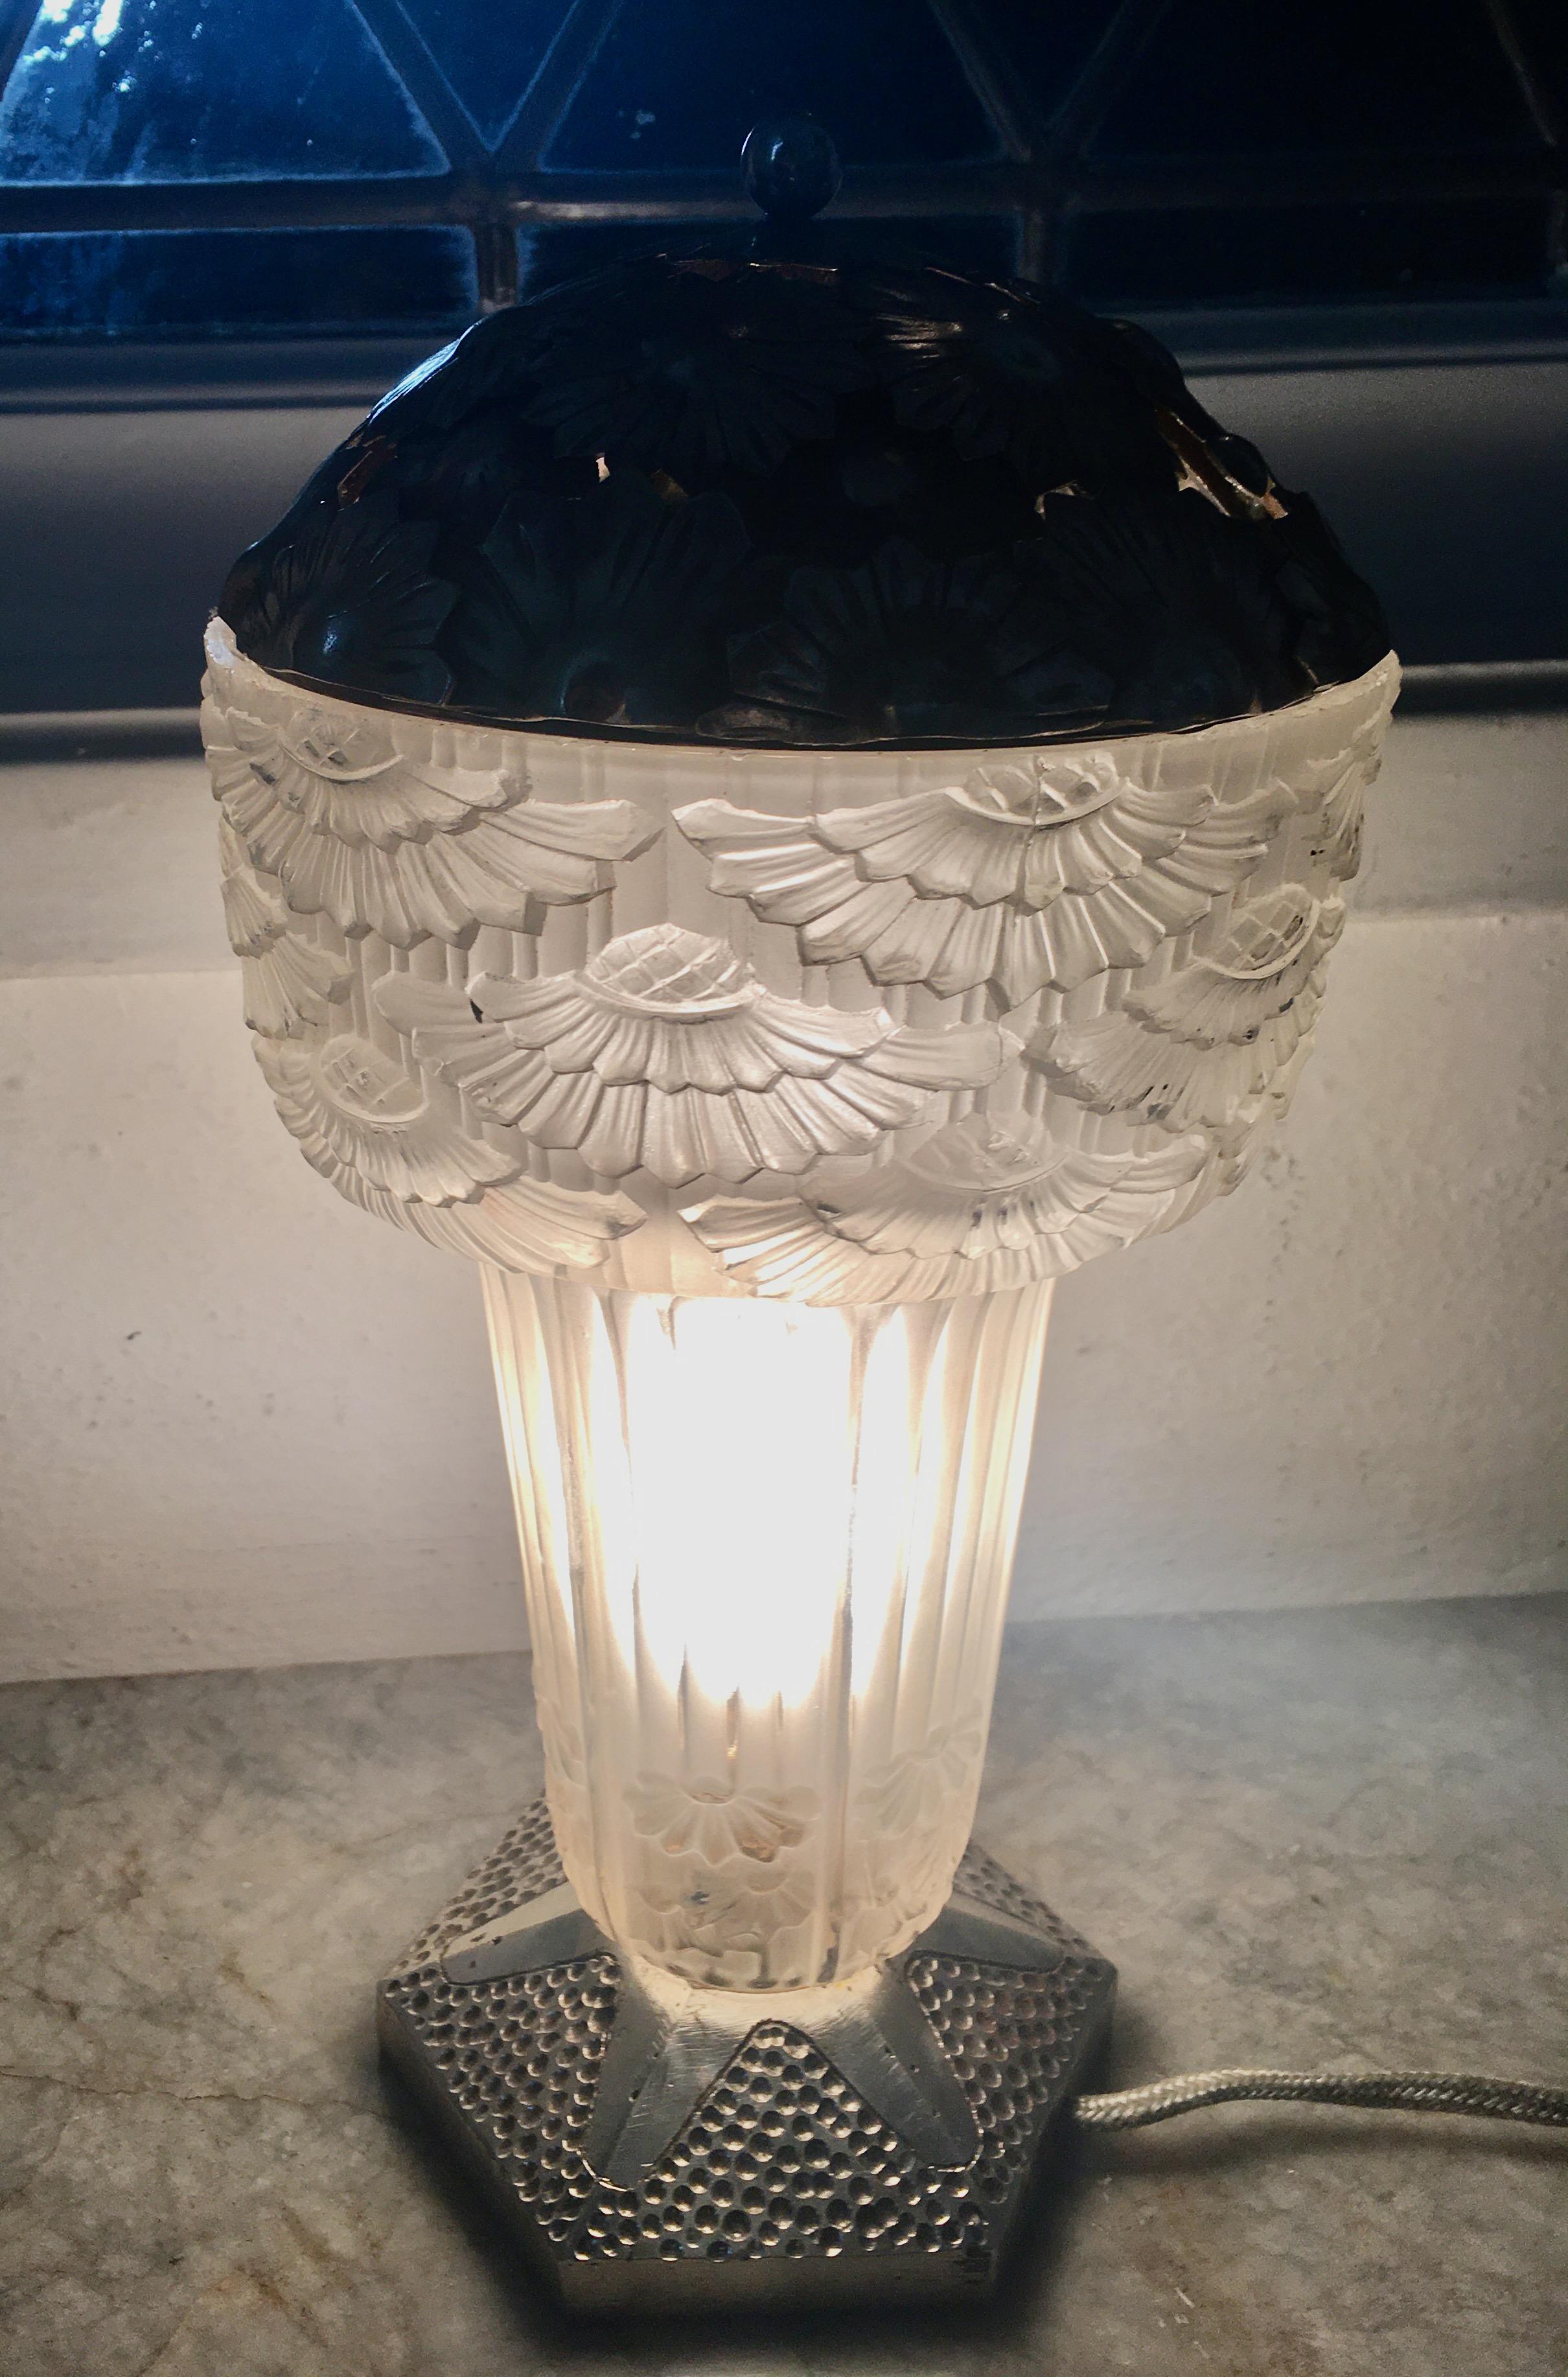 French Art Deco table lamp by Georges Leleu. Rare original piece with detailed glass and detailed metalwork in nickeled bronze. The glass is signed G. Leleu in the glass and there is a 4 digit number above it. So great to see some of these survive